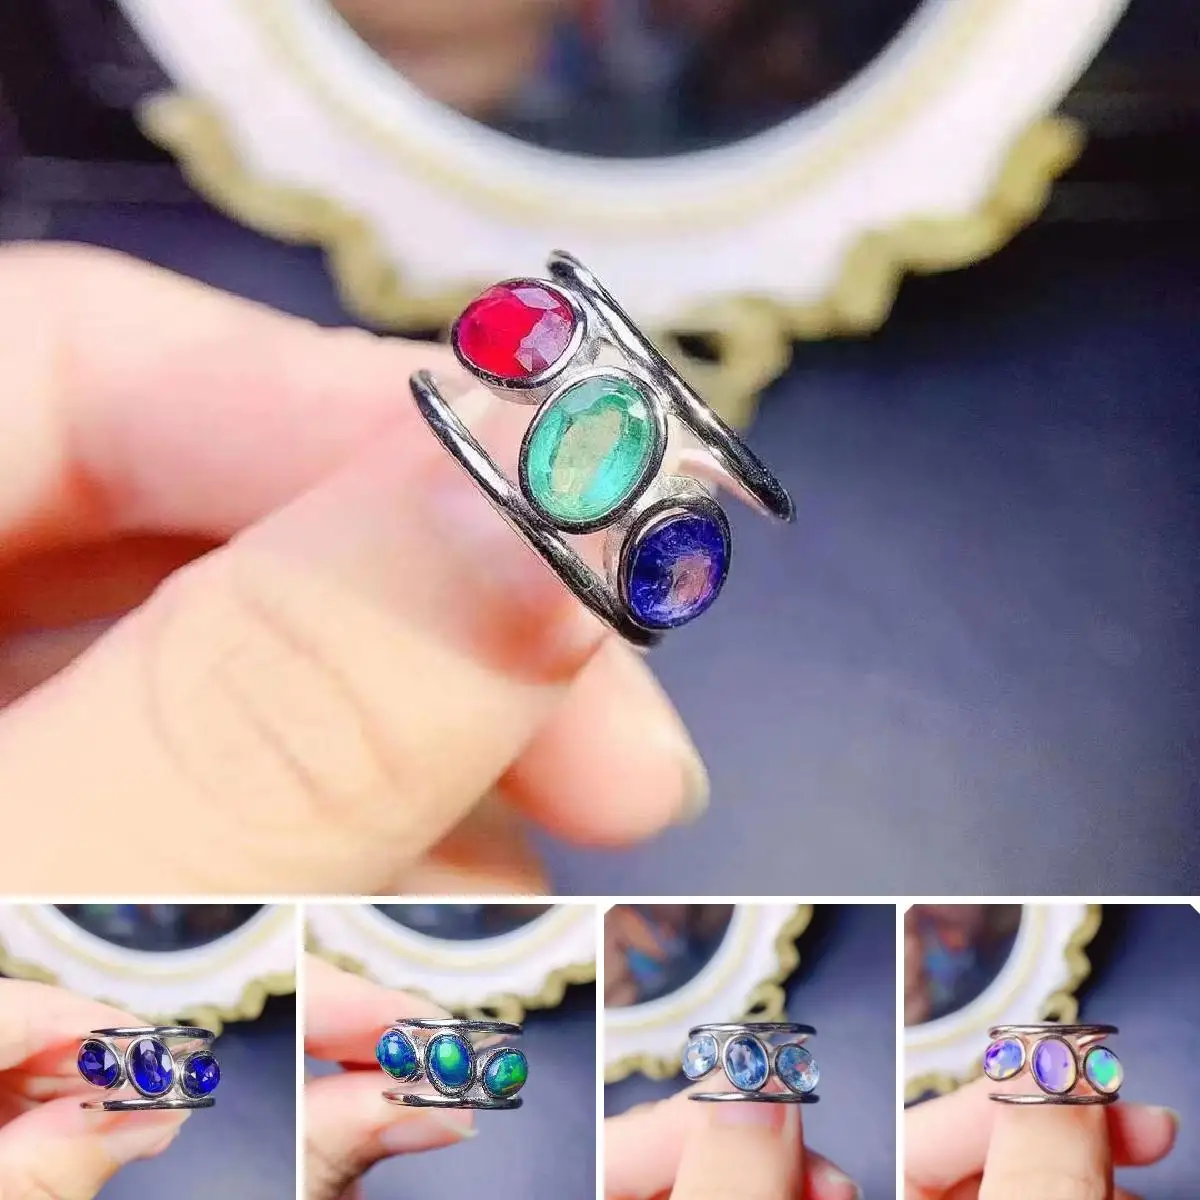 

FS Natural 5*7 Emerald Sapphire Ruby/Opal Ring Real S925 Sterling Silver Fashion Fine Weddings Charm Jewelry for Women MeiBaPJ